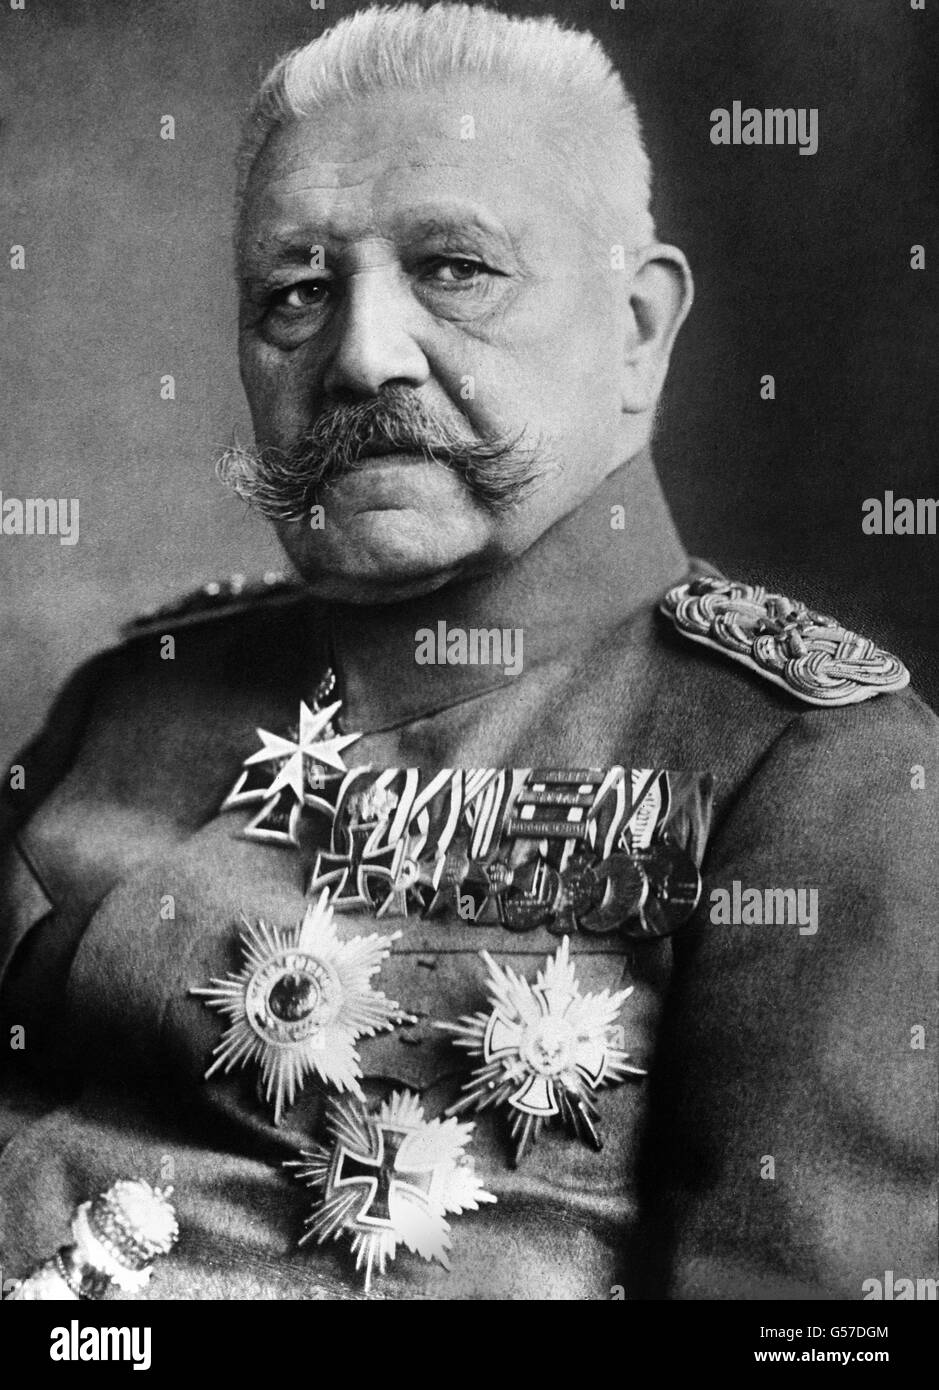 FELDMARSCHALL PAUL VON HINDENBURG c1918: A portrait of Von Hindenburg (1847-1934), German Field Marshal and President (1925-1934). During the First World War he directed German military strategy with the able Ludendorff (1916-1918). Stock Photo